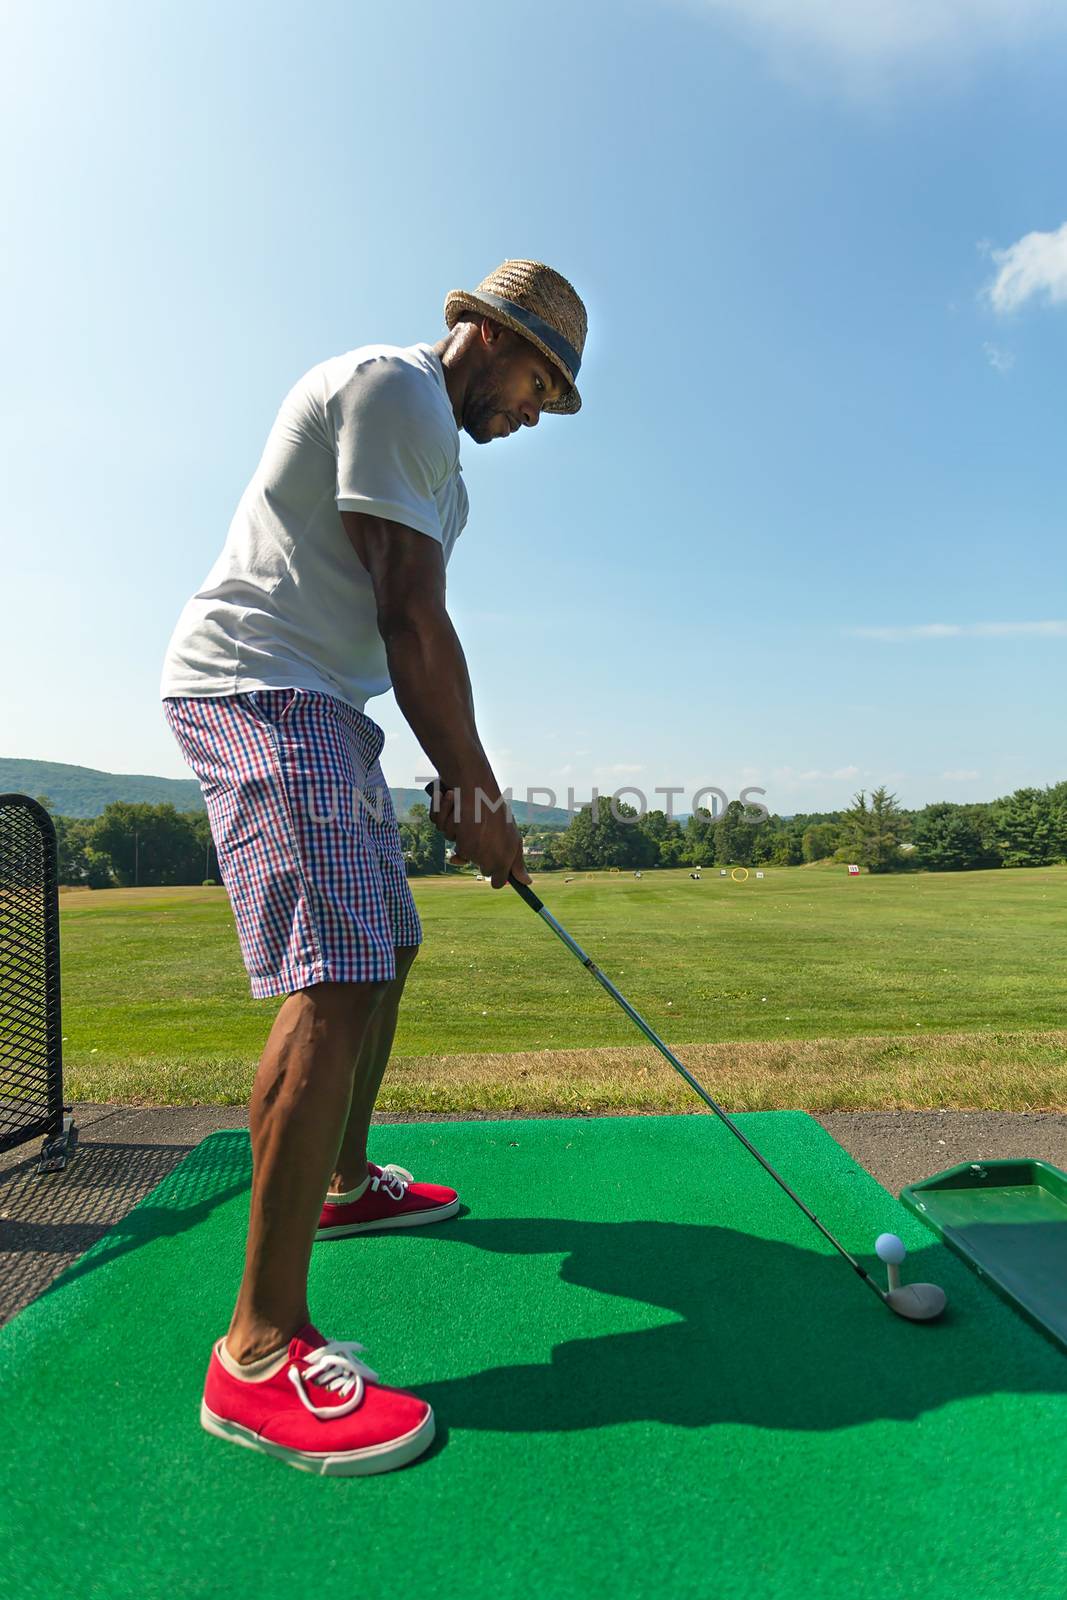 Golfer Teeing Up at the Driving Range by graficallyminded